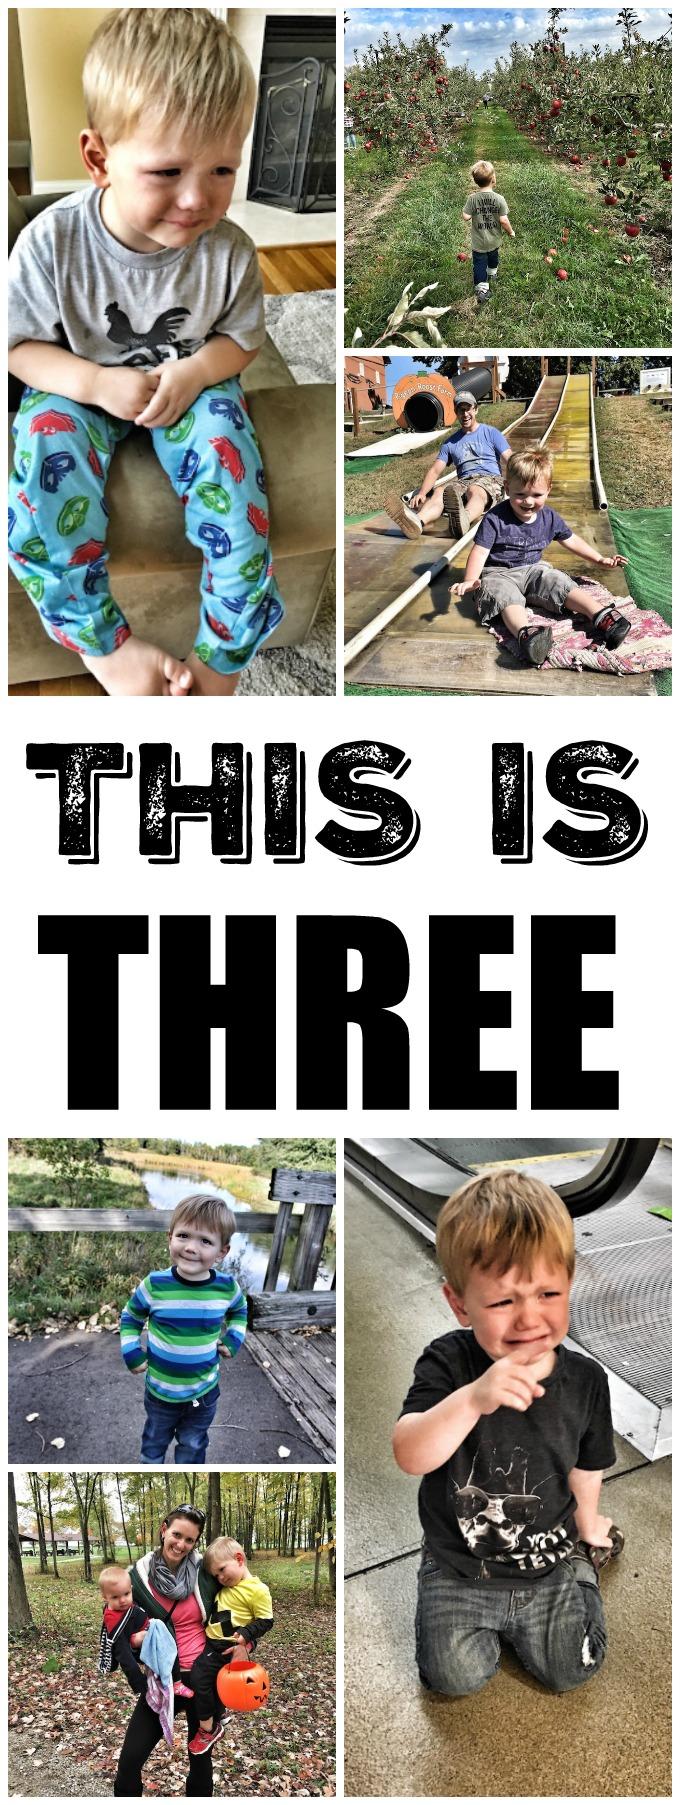 This is three. Three is hard, frustrating and amazing all rolled into one.